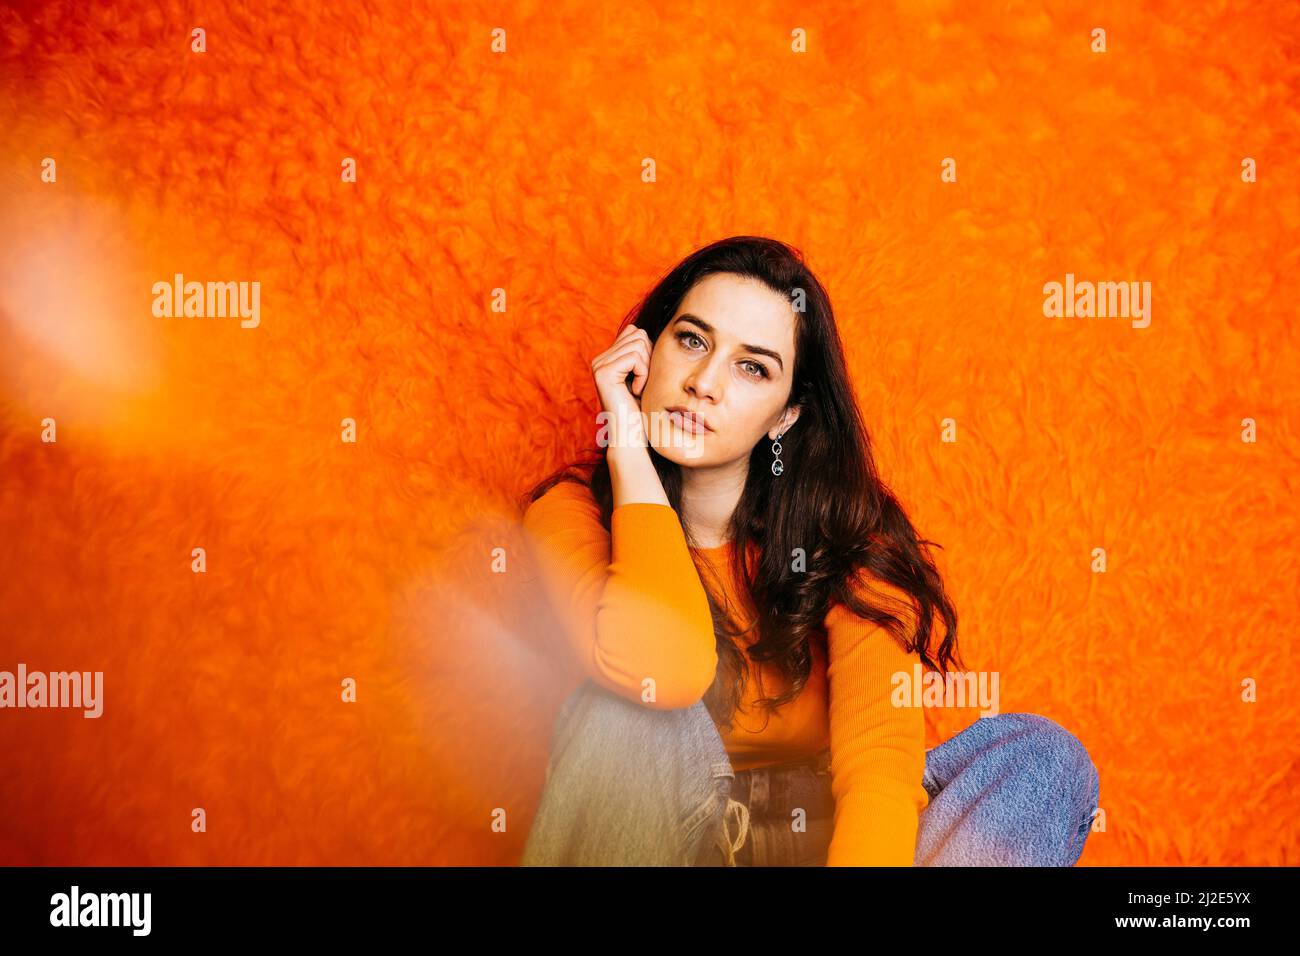 Portrait of brunette caucasian young woman with long hair, sitting against an orange haired background Stock Photo